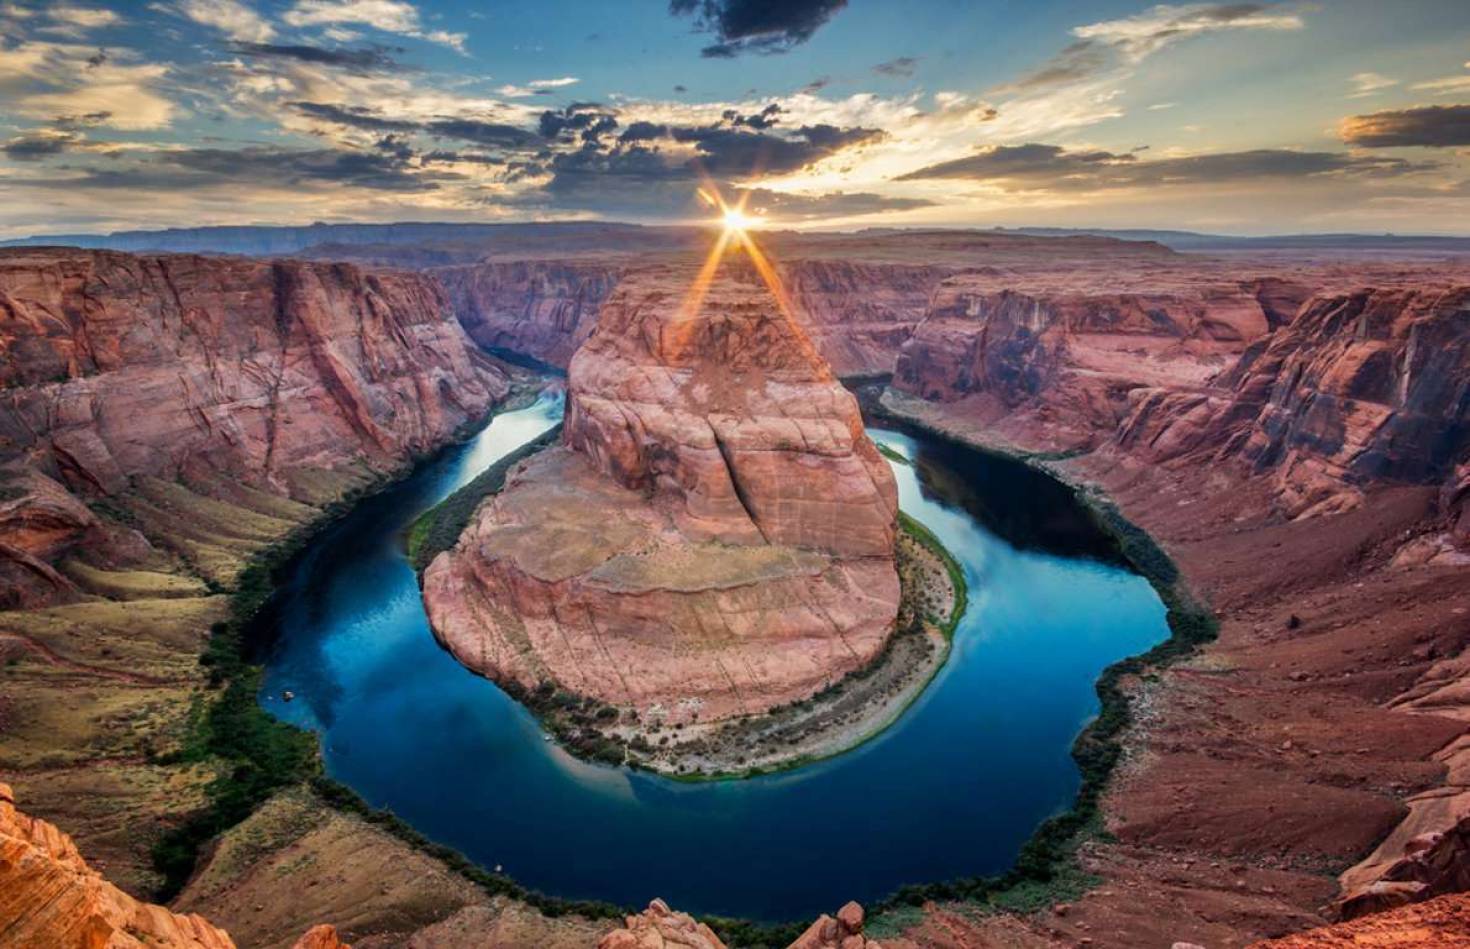 Horseshoe Bend in Grand Canyon